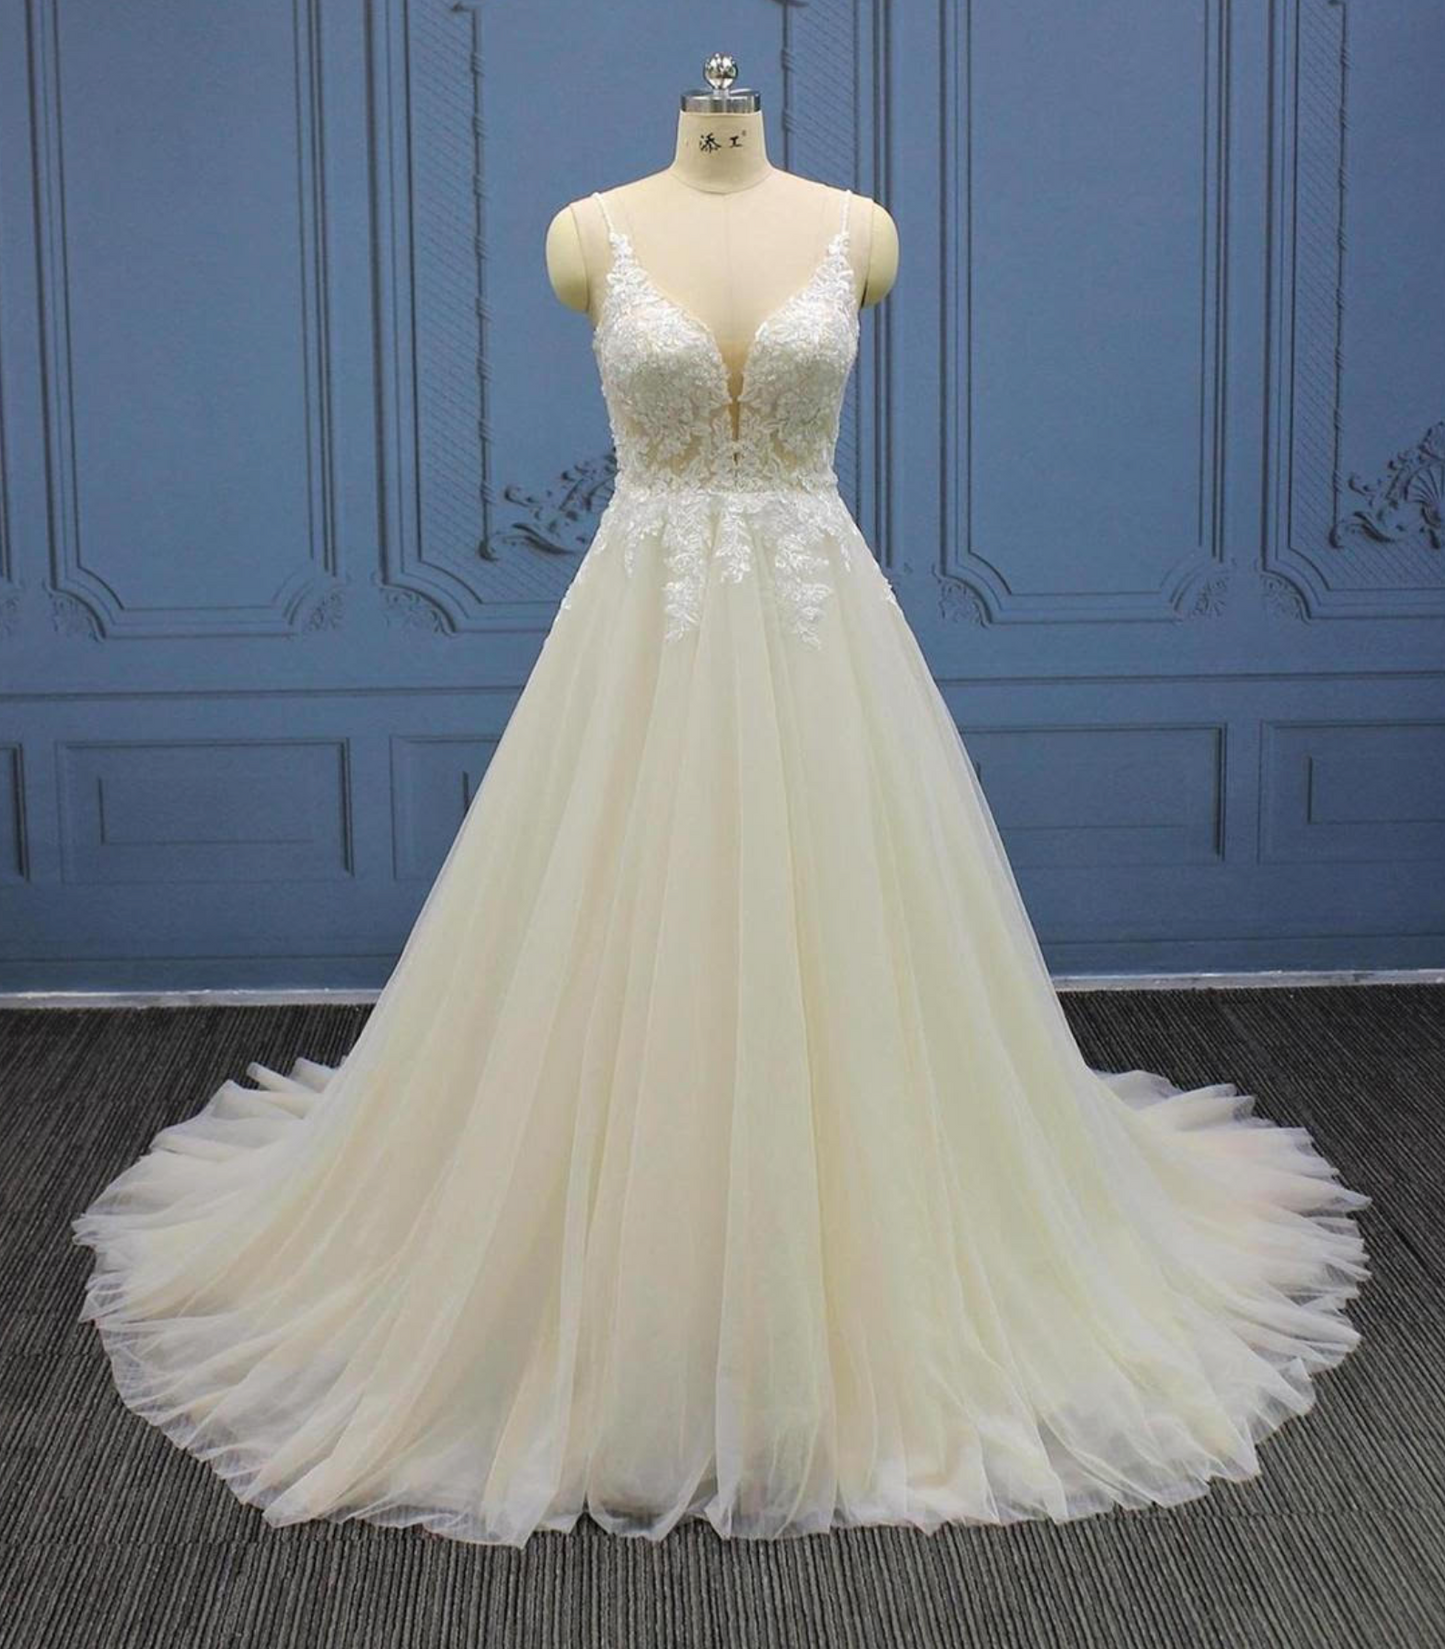 Tulle Garden Party Lace A Line Bridal Gown